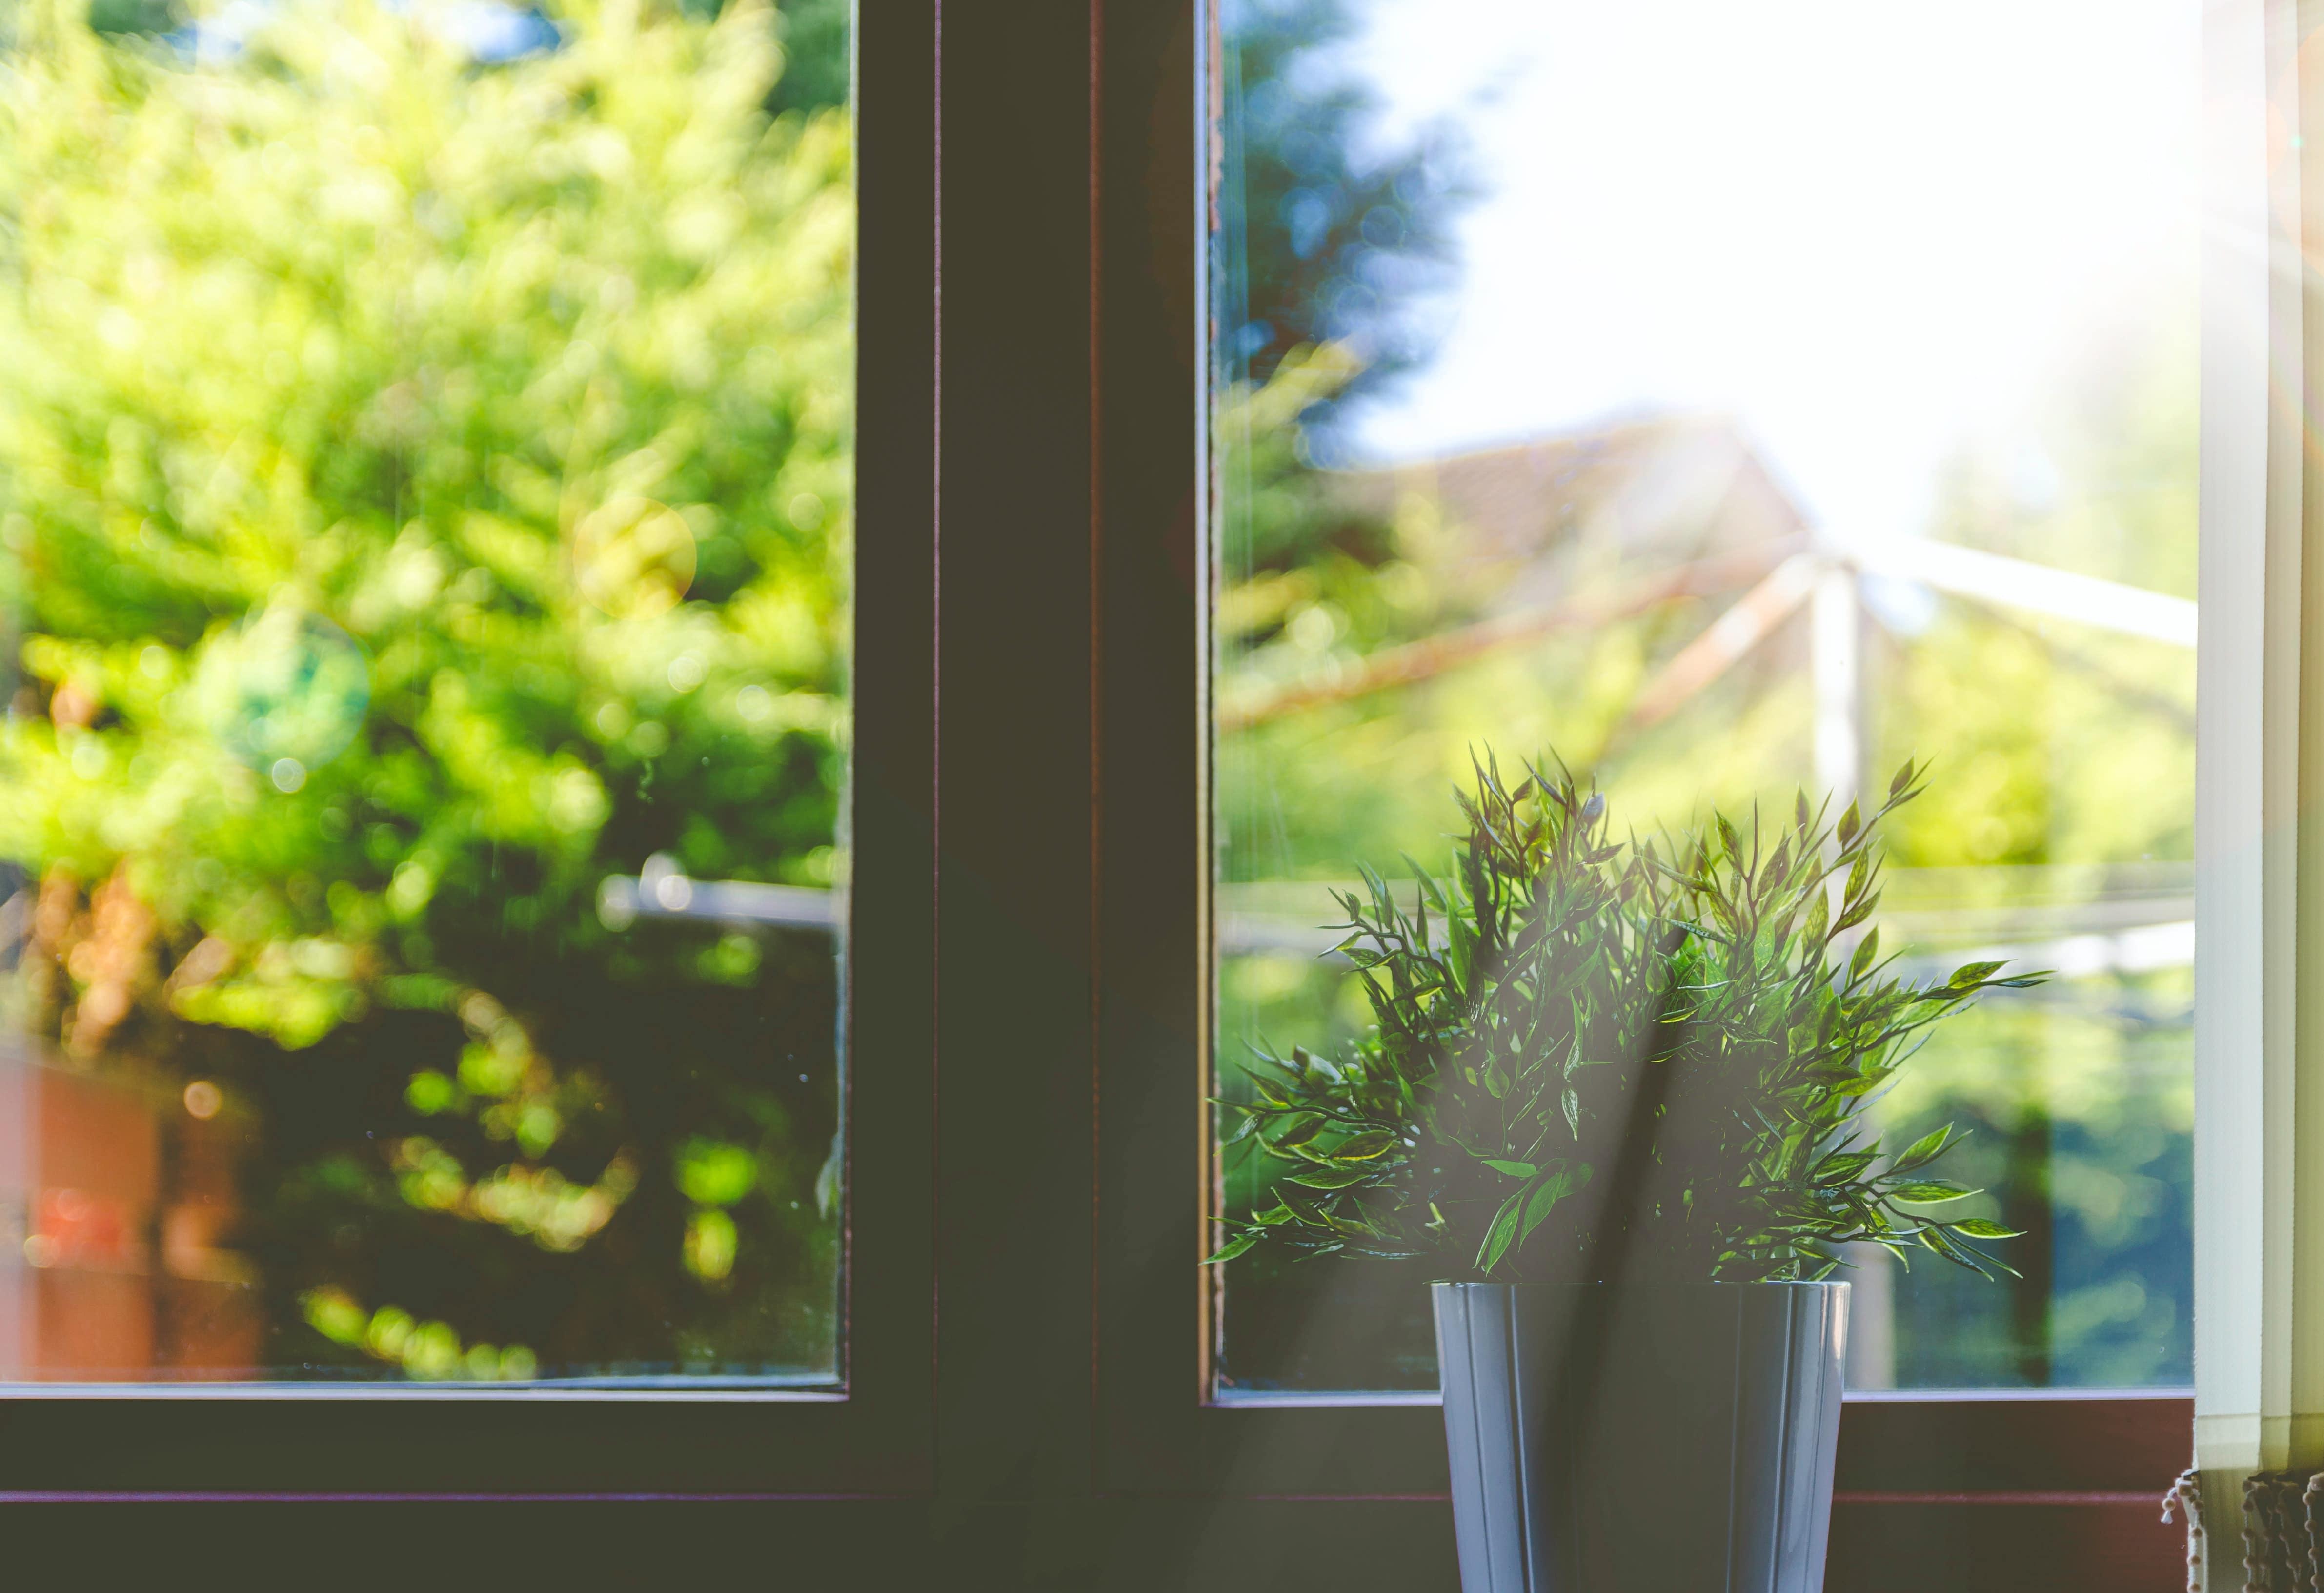 Bright sunlight shining through a window with a house plant in the foreground